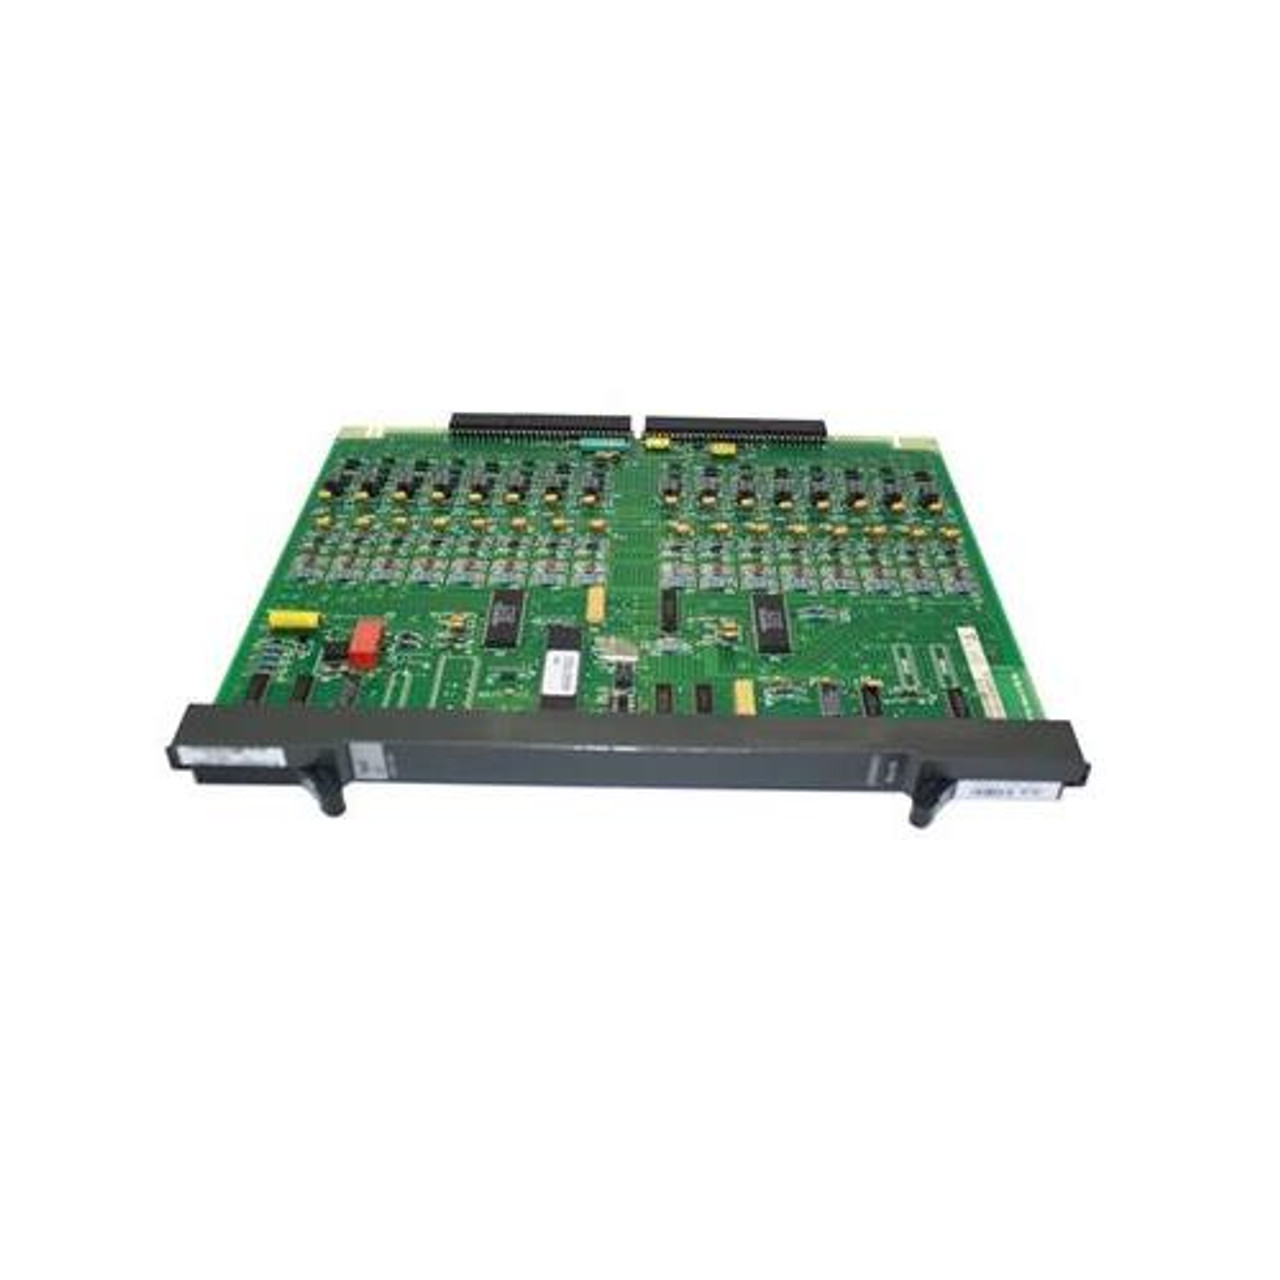 1064500812 Nortel Circuit Board for Bcn-router Fre2 (Refurbished)